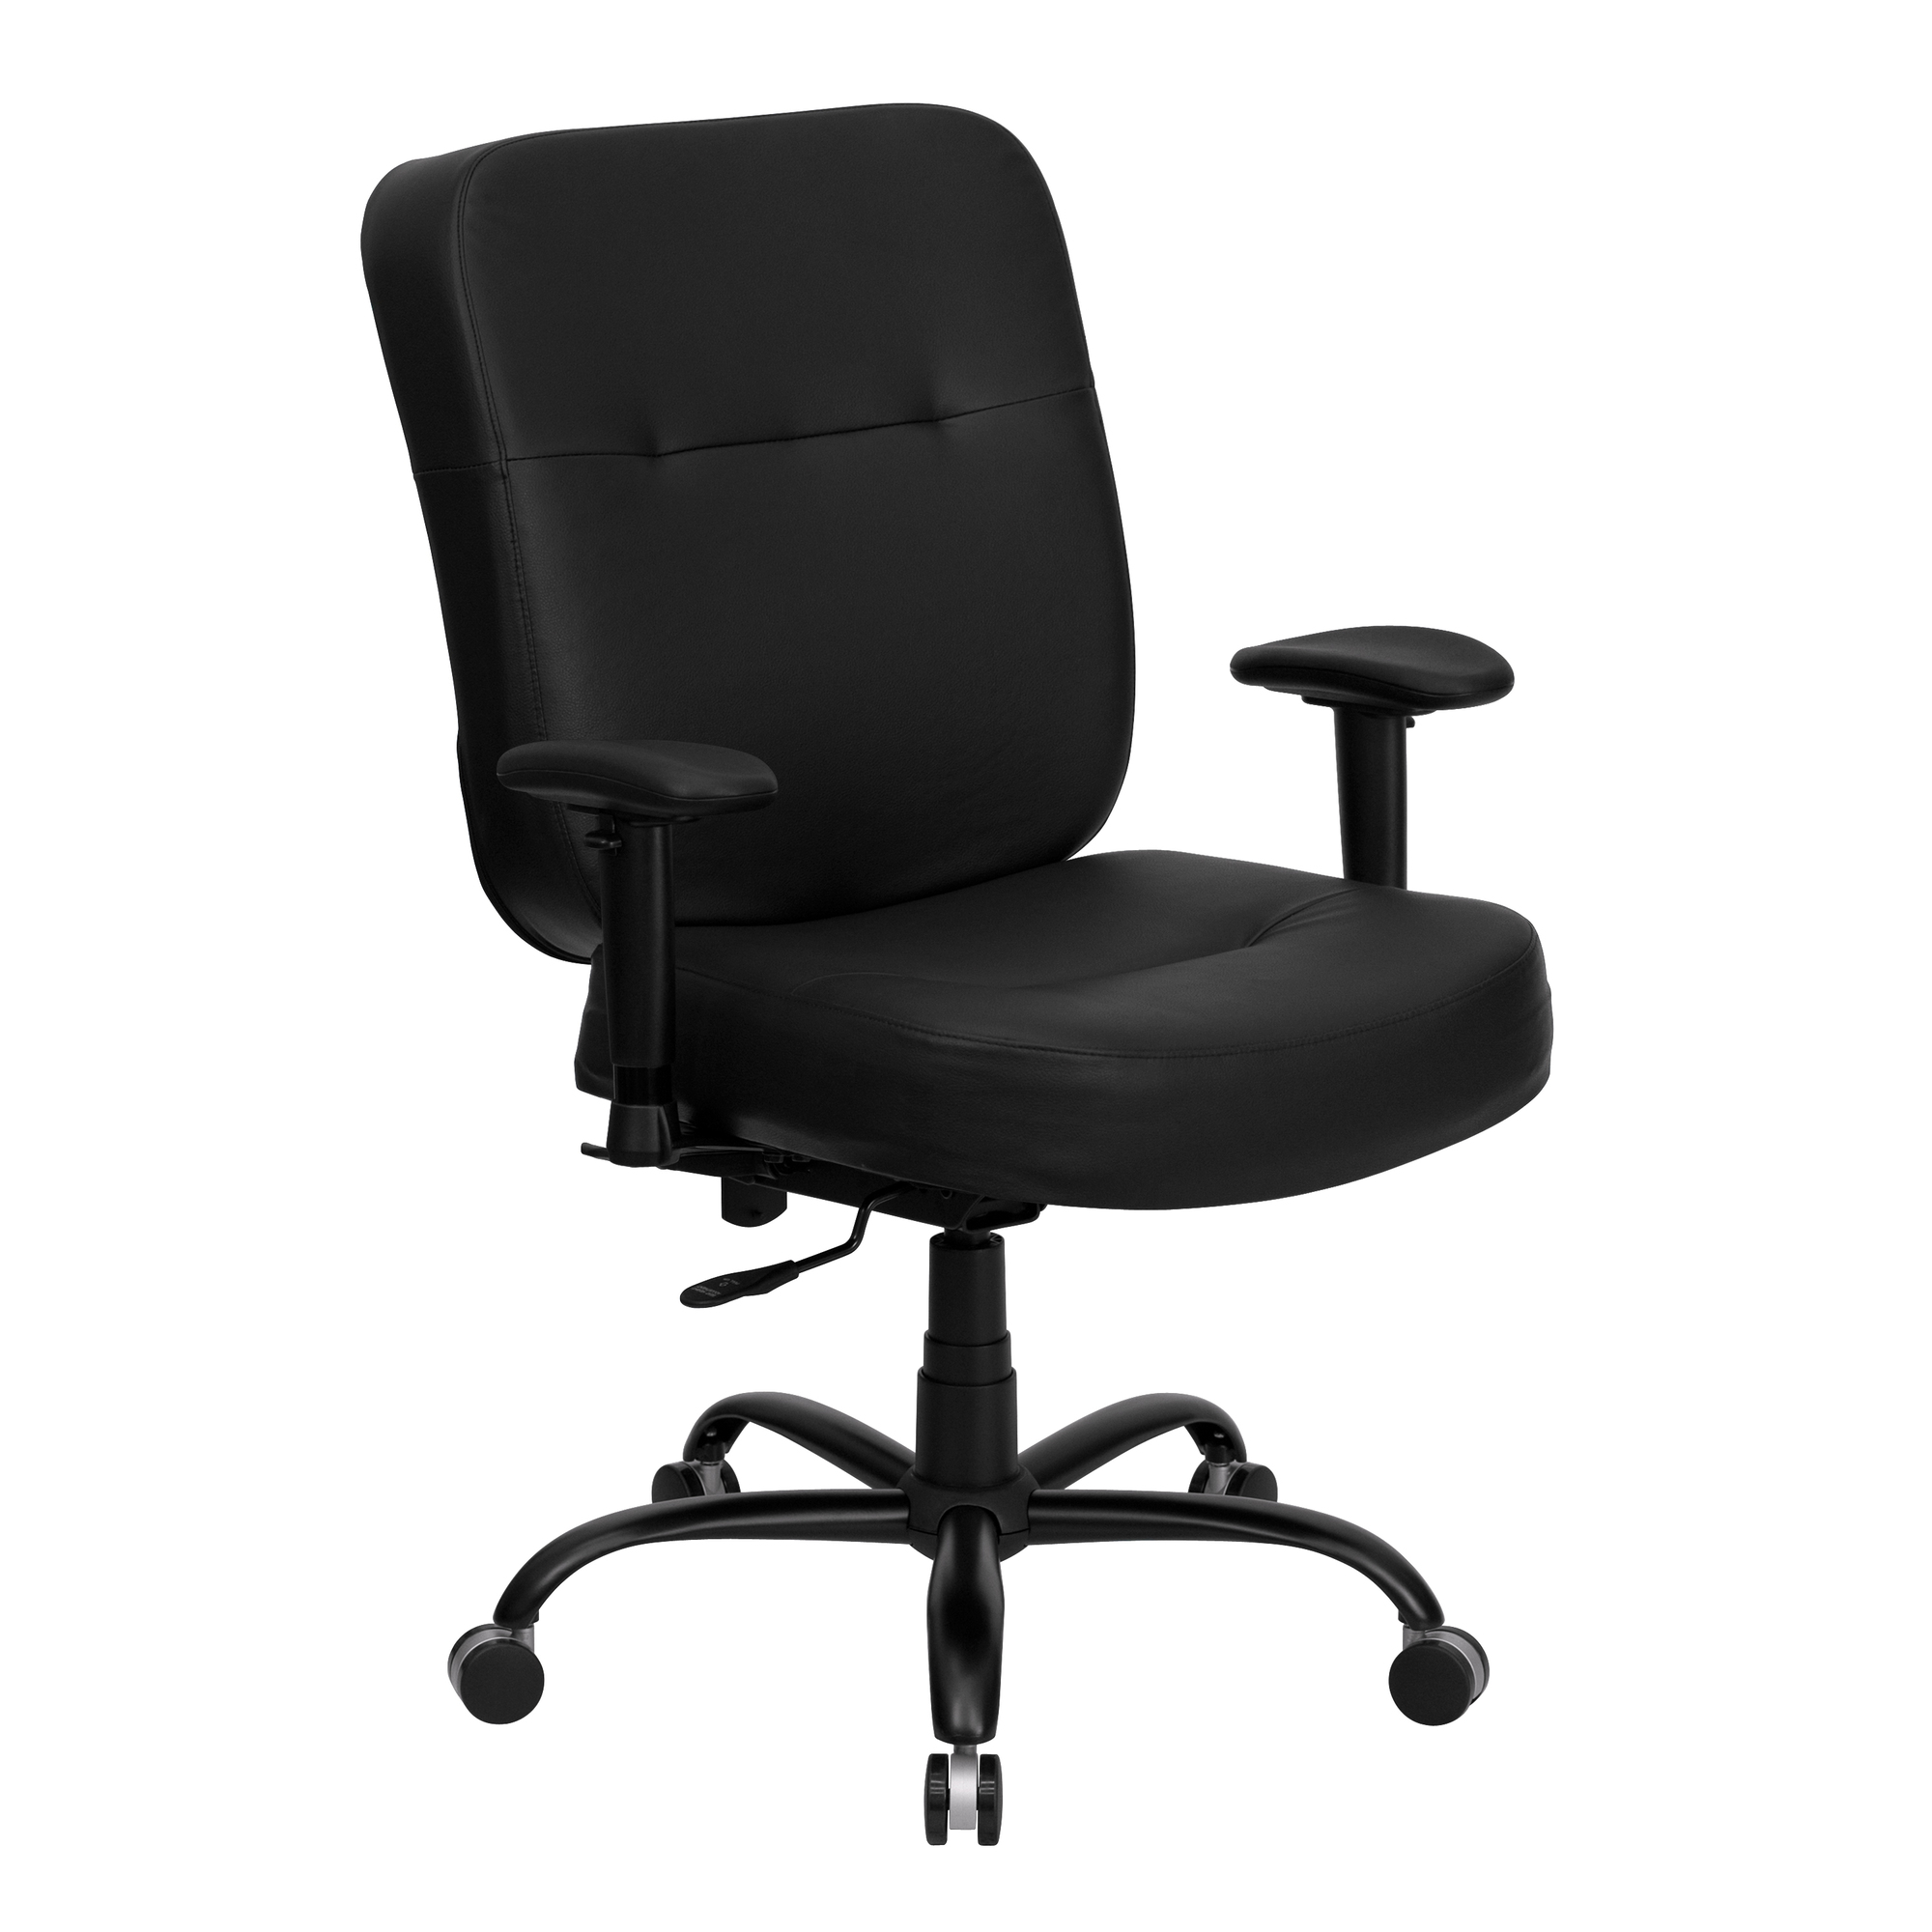 400 lb. Rated High Back Black LeatherSoft Chair, Primary Color Black, Included (qty.) 1, Model - Flash Furniture WL735SYGBKLEAA